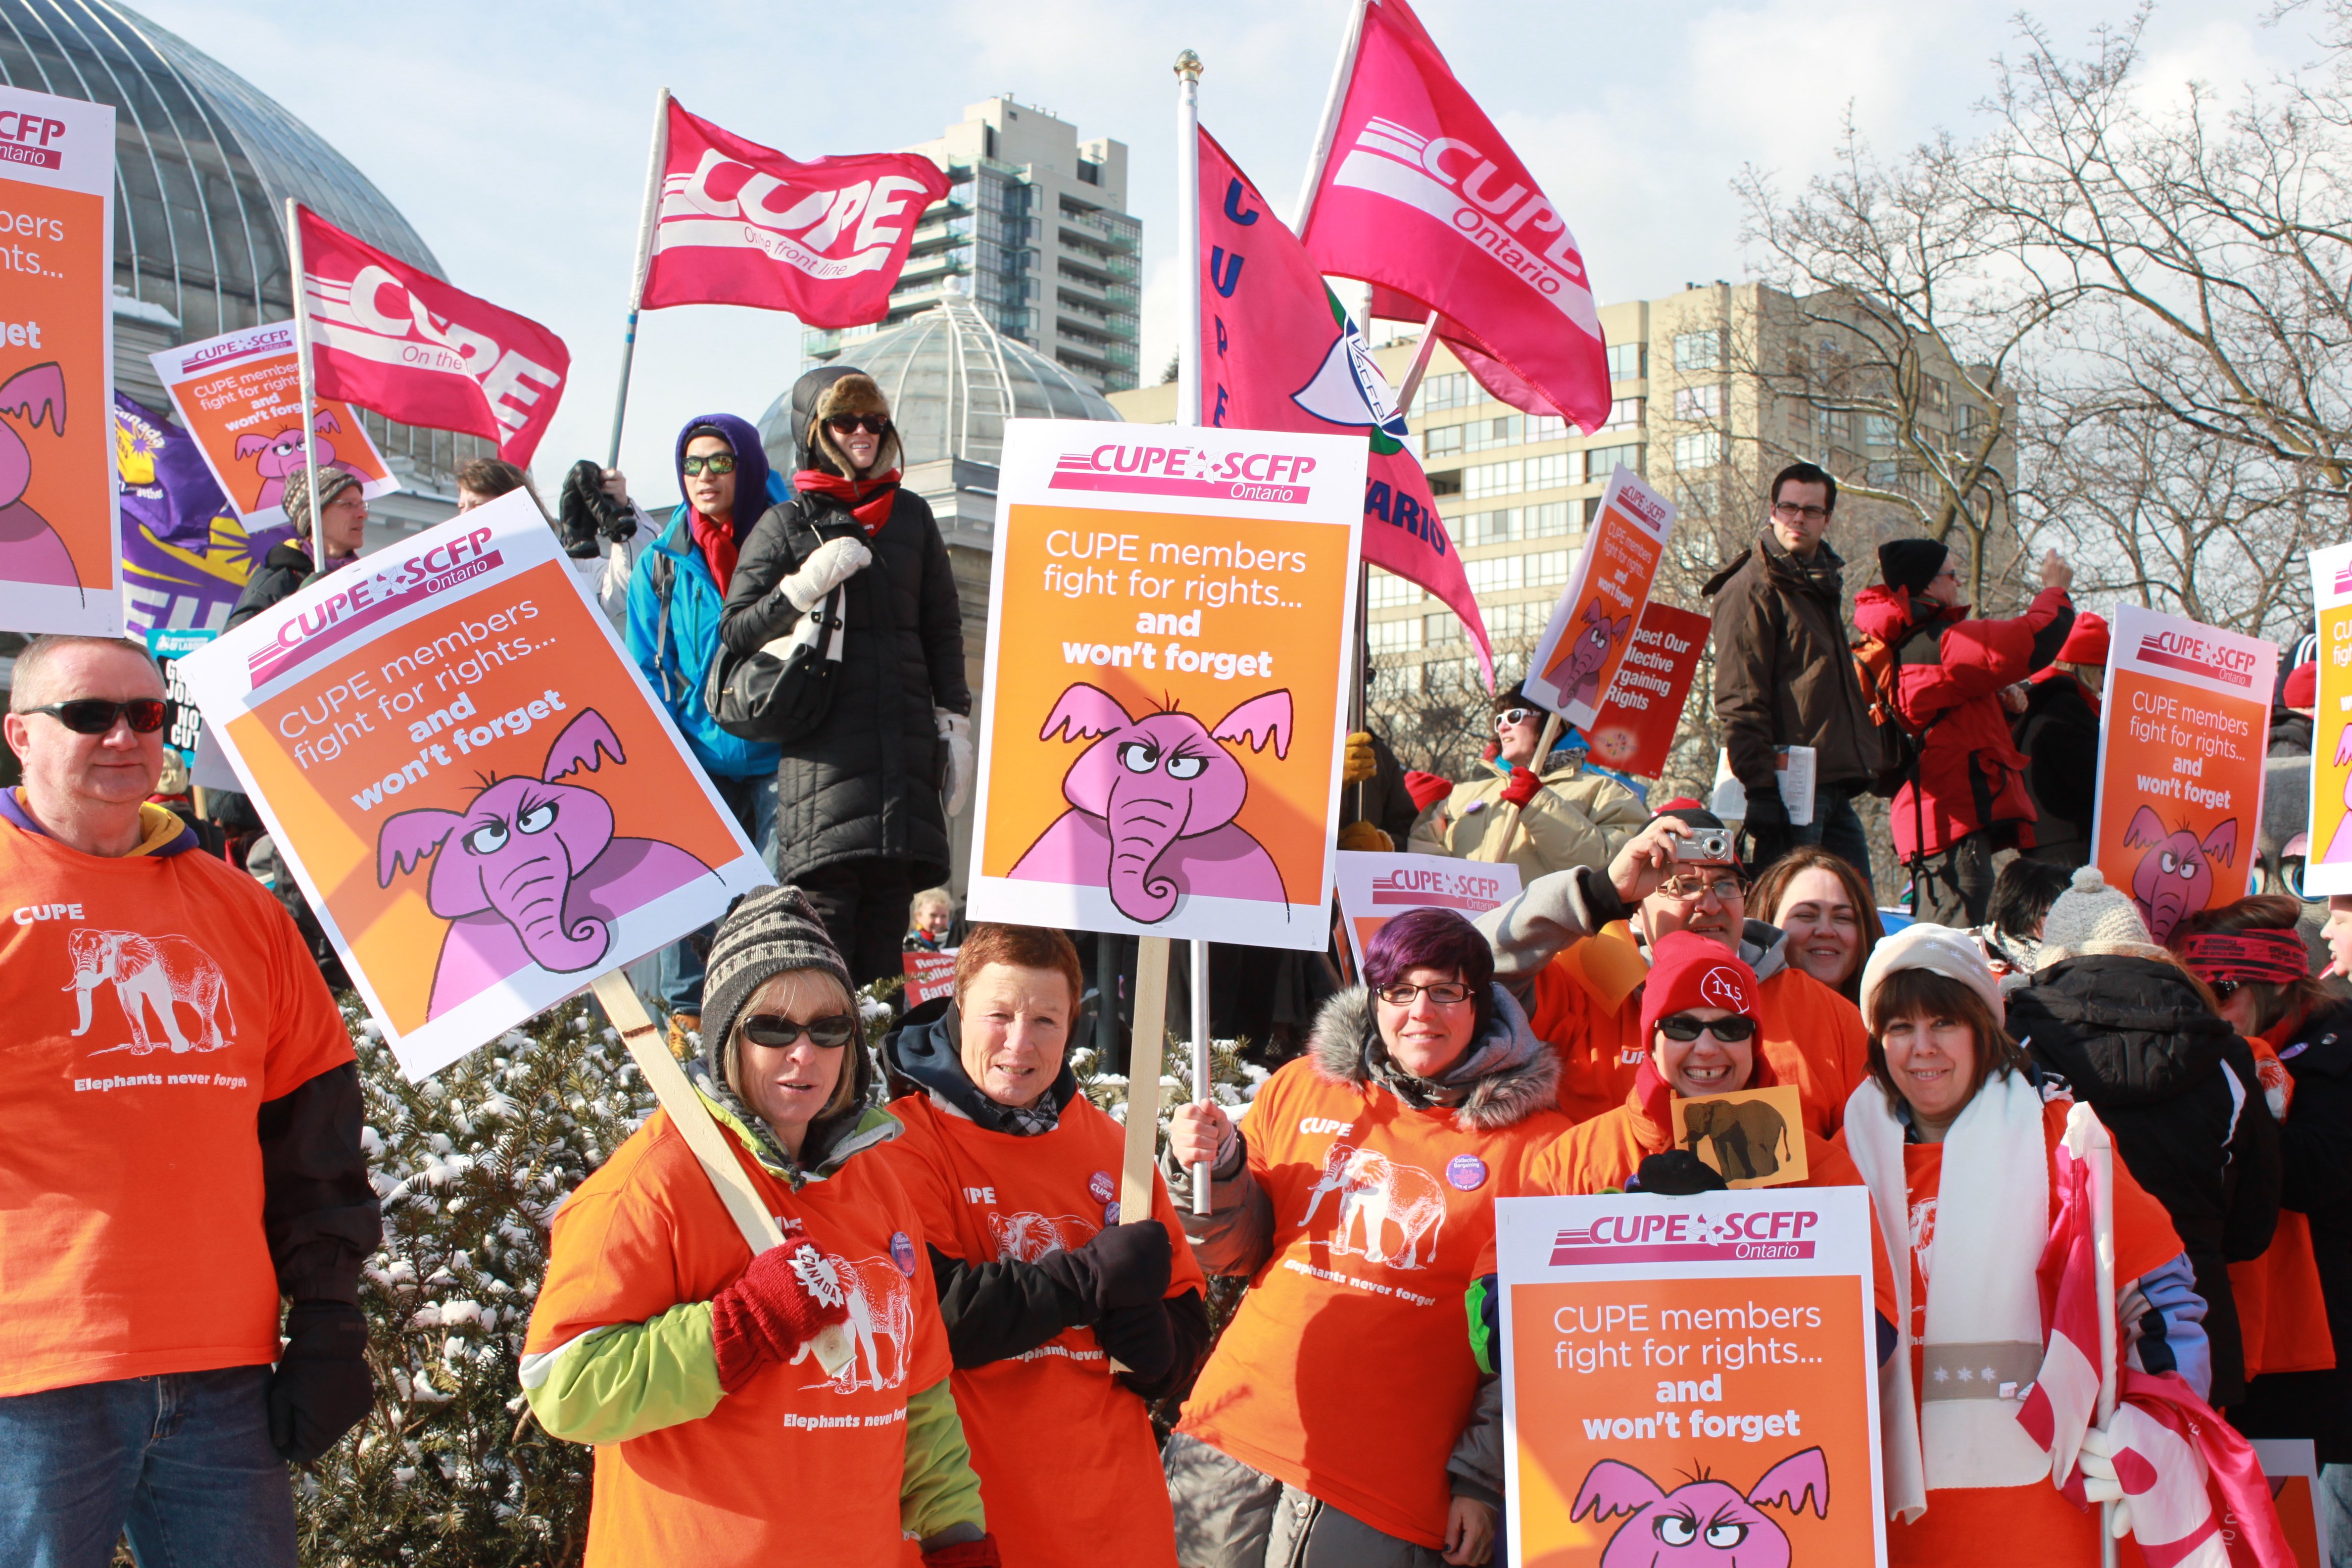 Members outside of Allan Gardens in Toronto, holding up signs that say "CUPE members fight for rights... and won't forget". The sign has a hand-drawn angry pink elephant on it